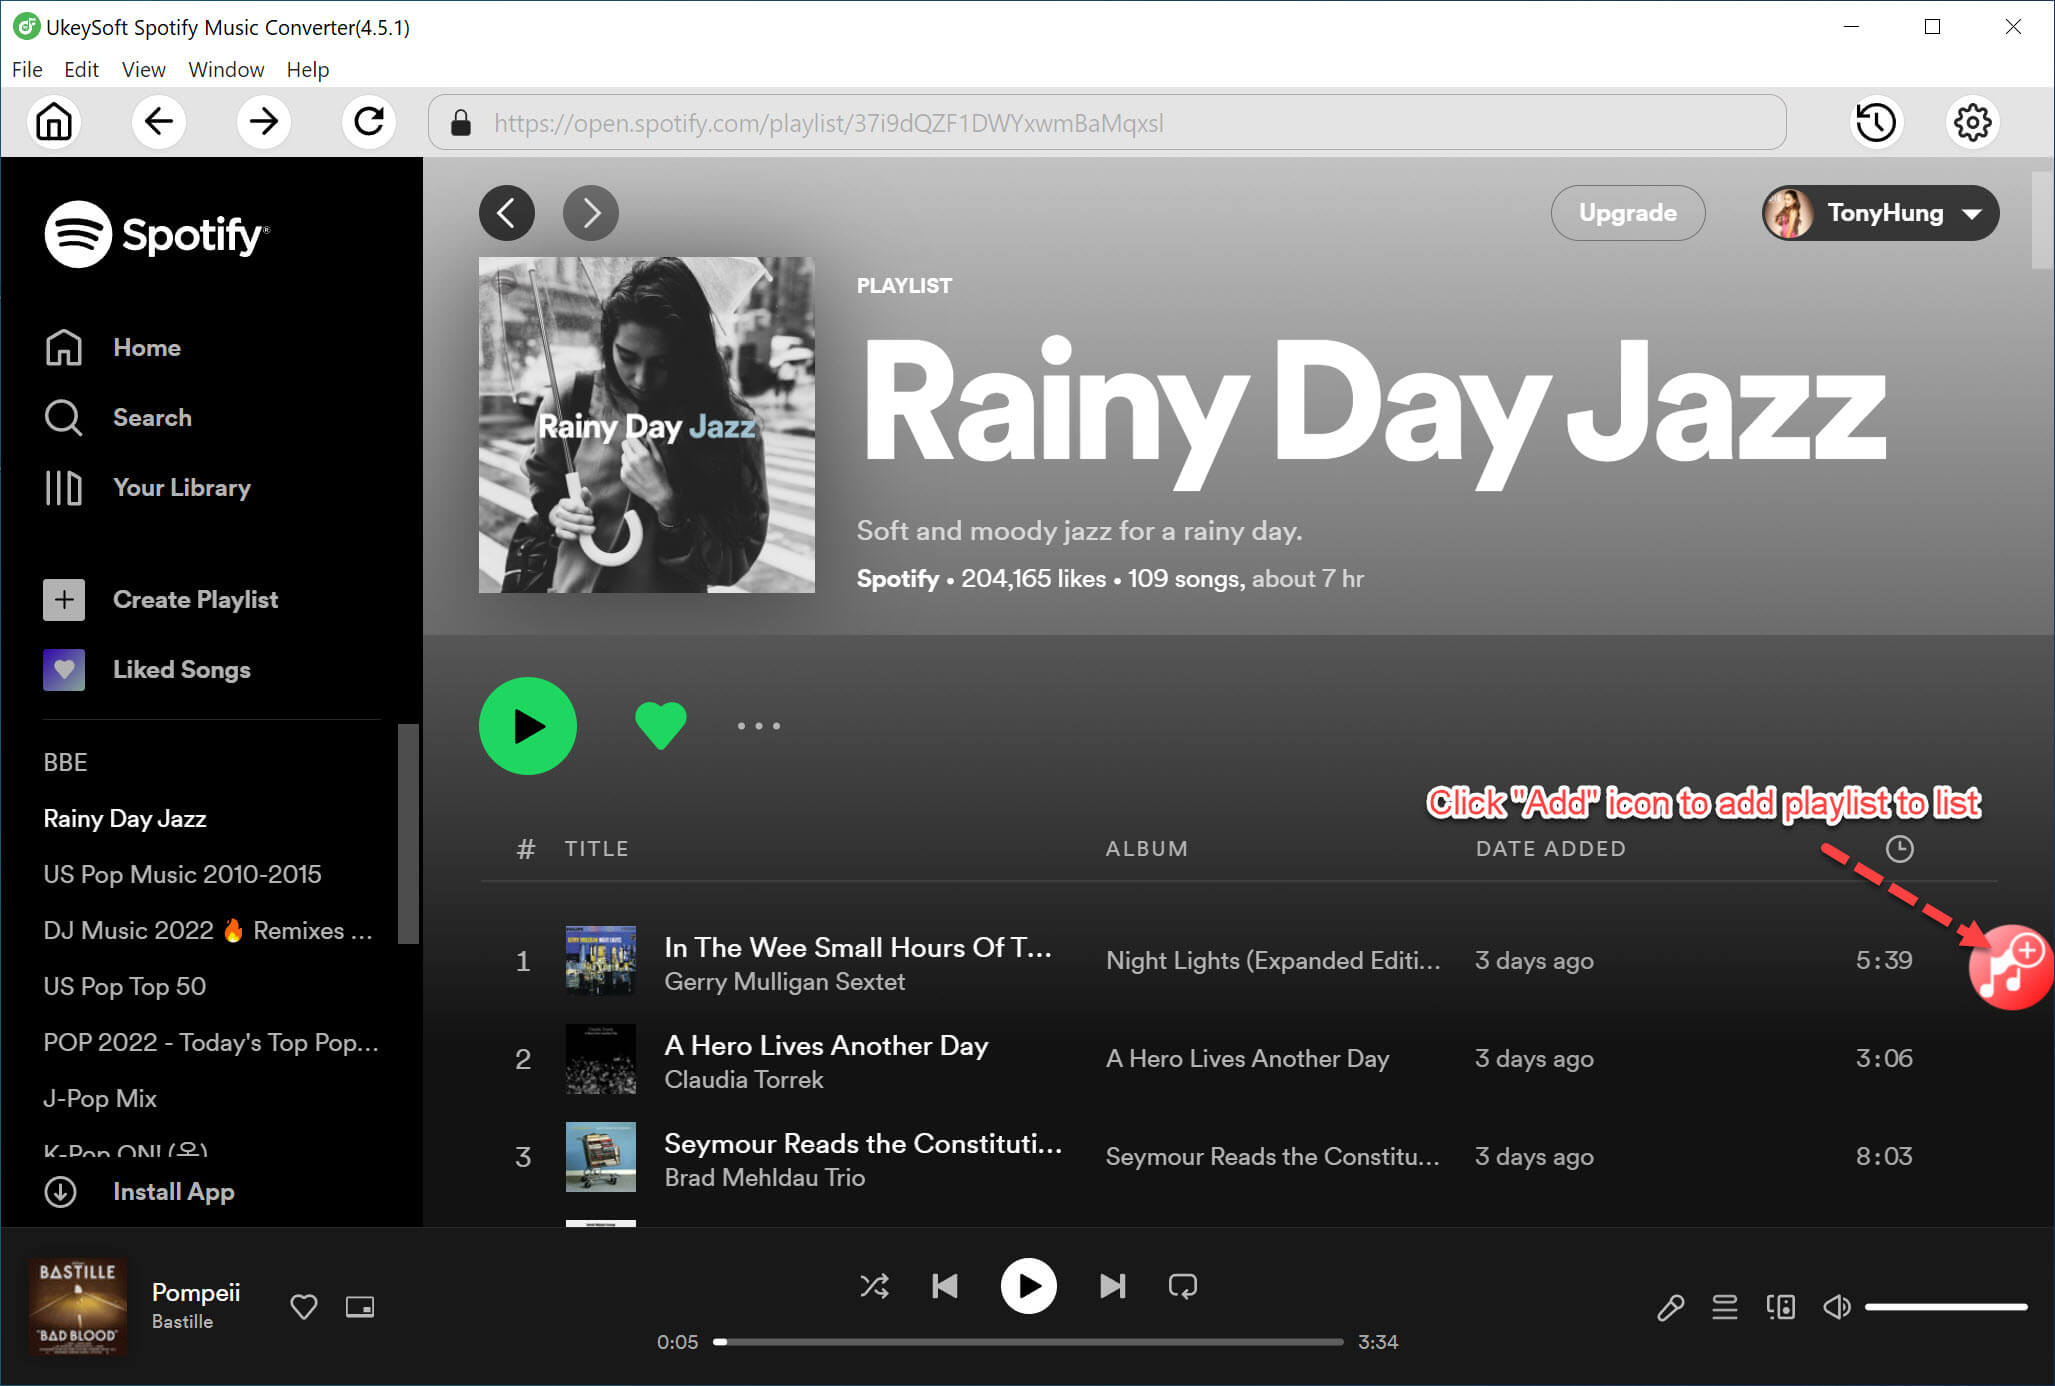 music converter app that supports spotify